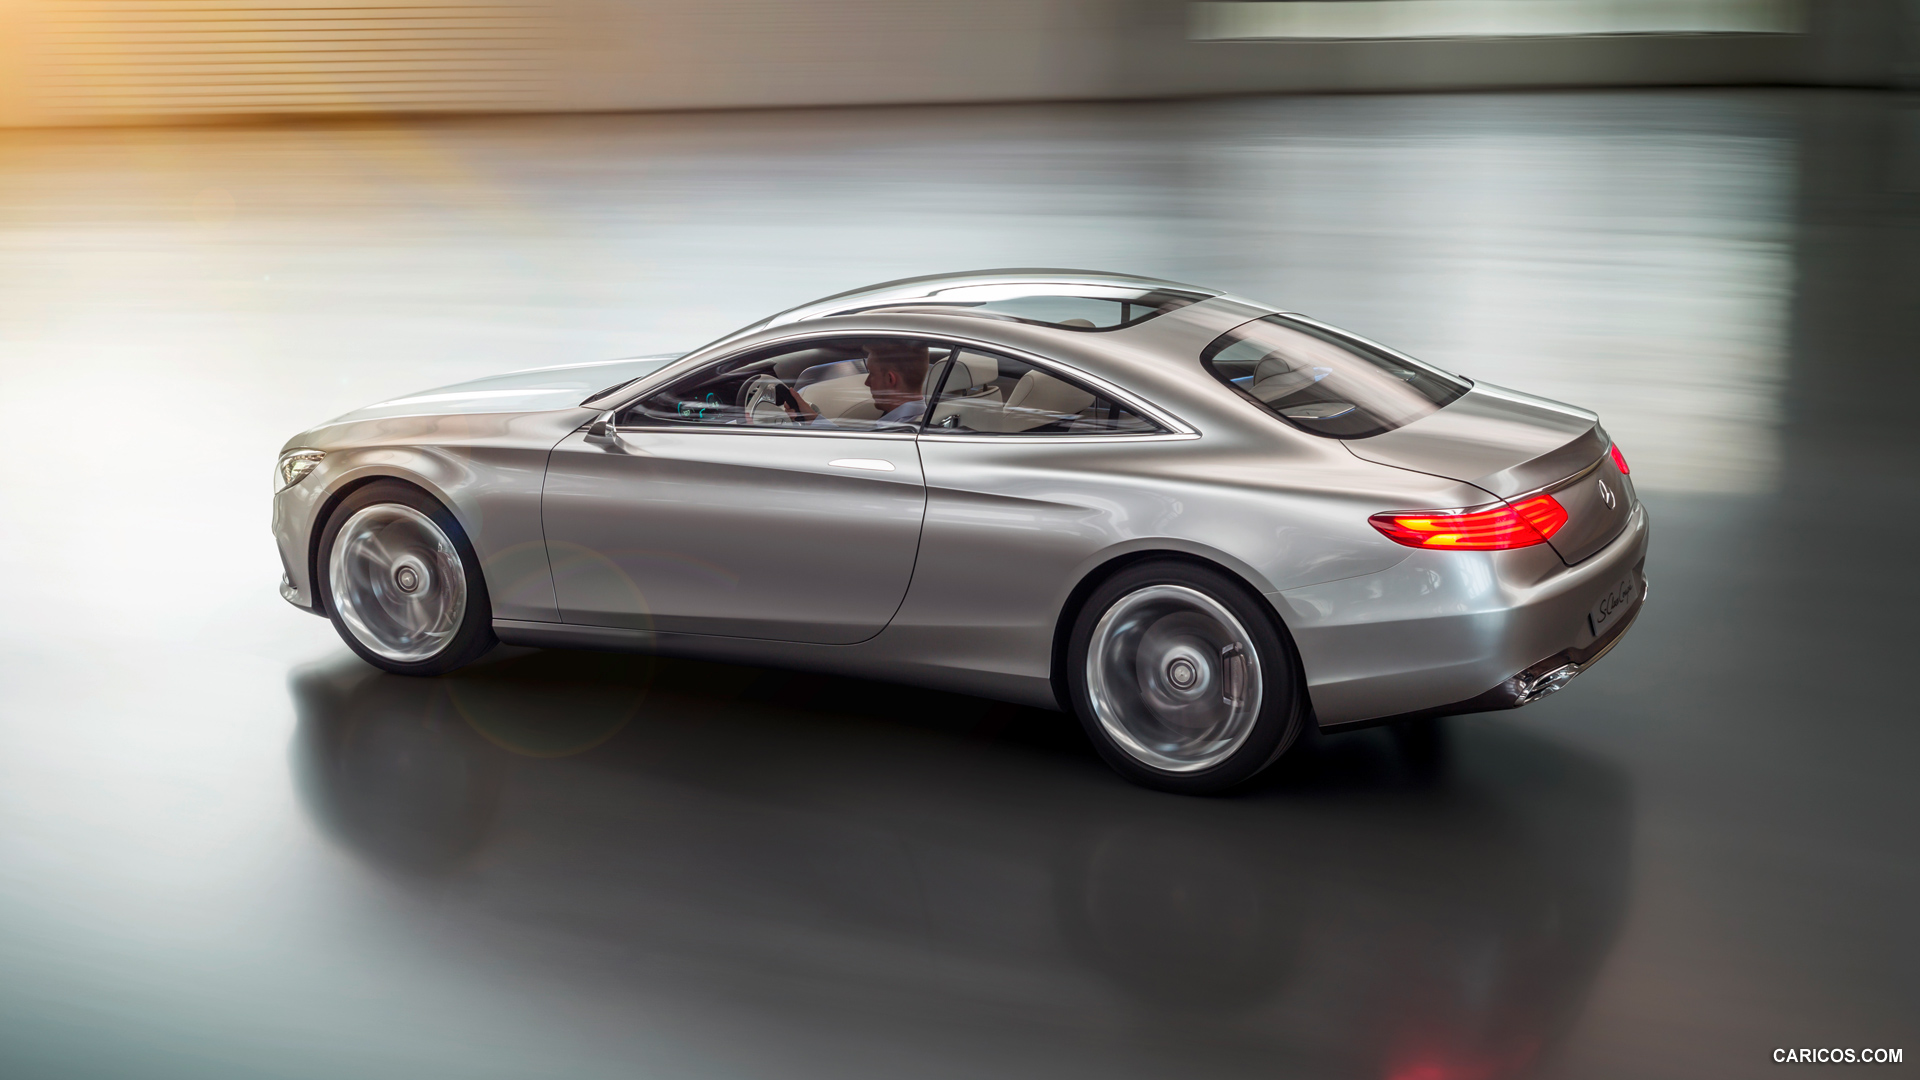 Mercedes-Benz S-Class Coupe Concept (2013)  - Side, #5 of 58